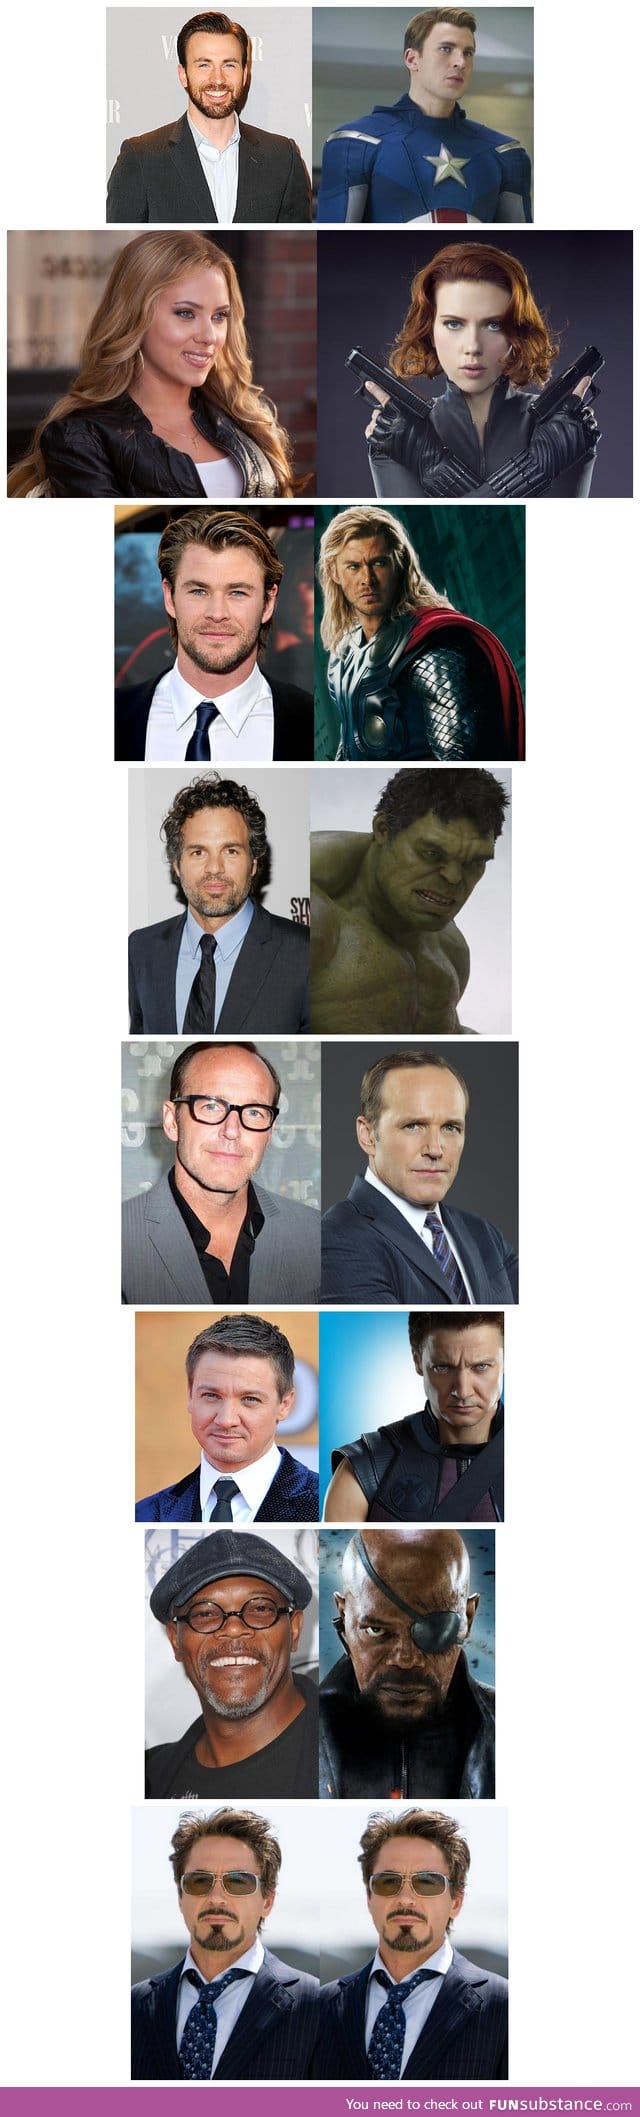 Avengers actors and characters